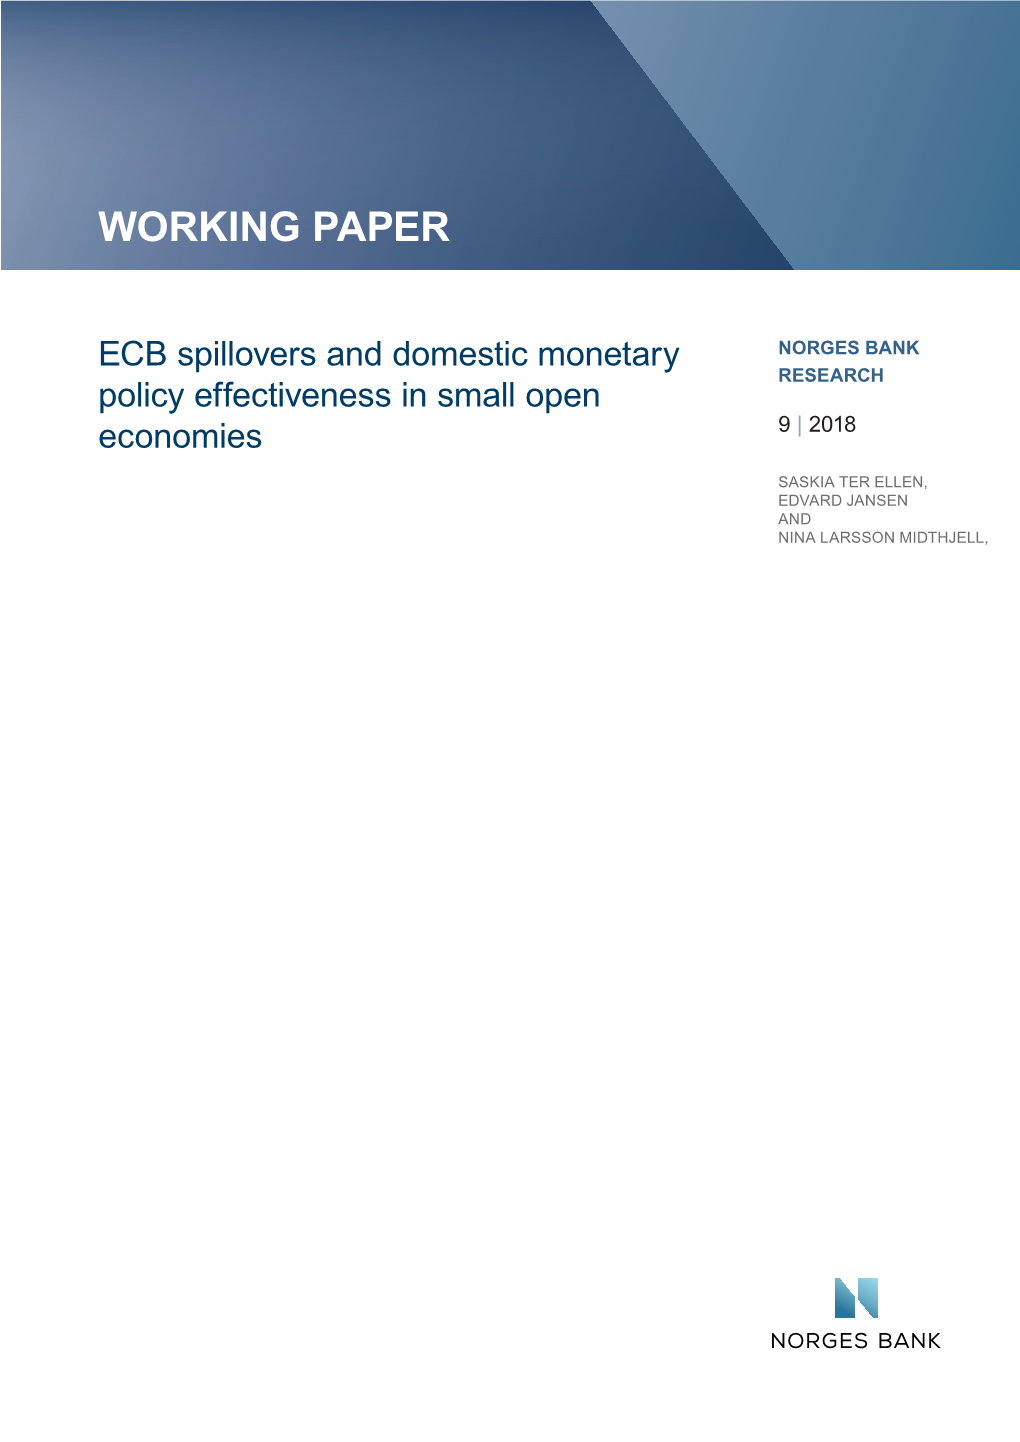 ECB Spillovers and Domestic Monetary Policy Effectiveness In